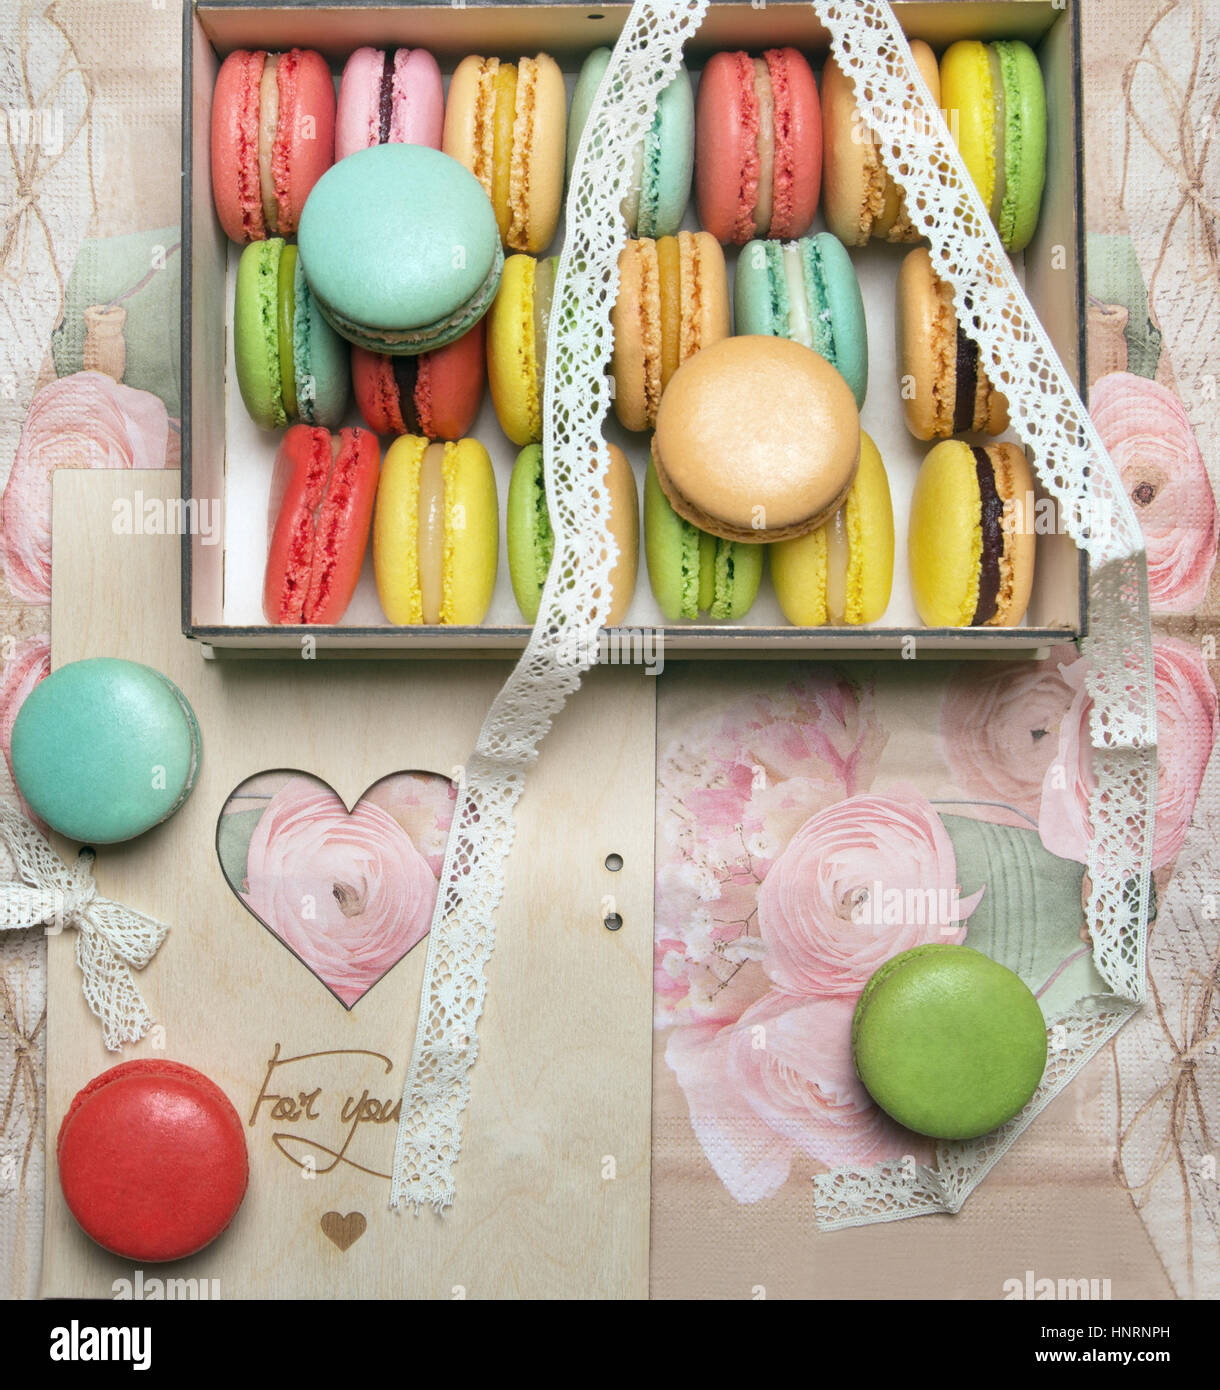 Macaroons in the box on vintage background Stock Photo